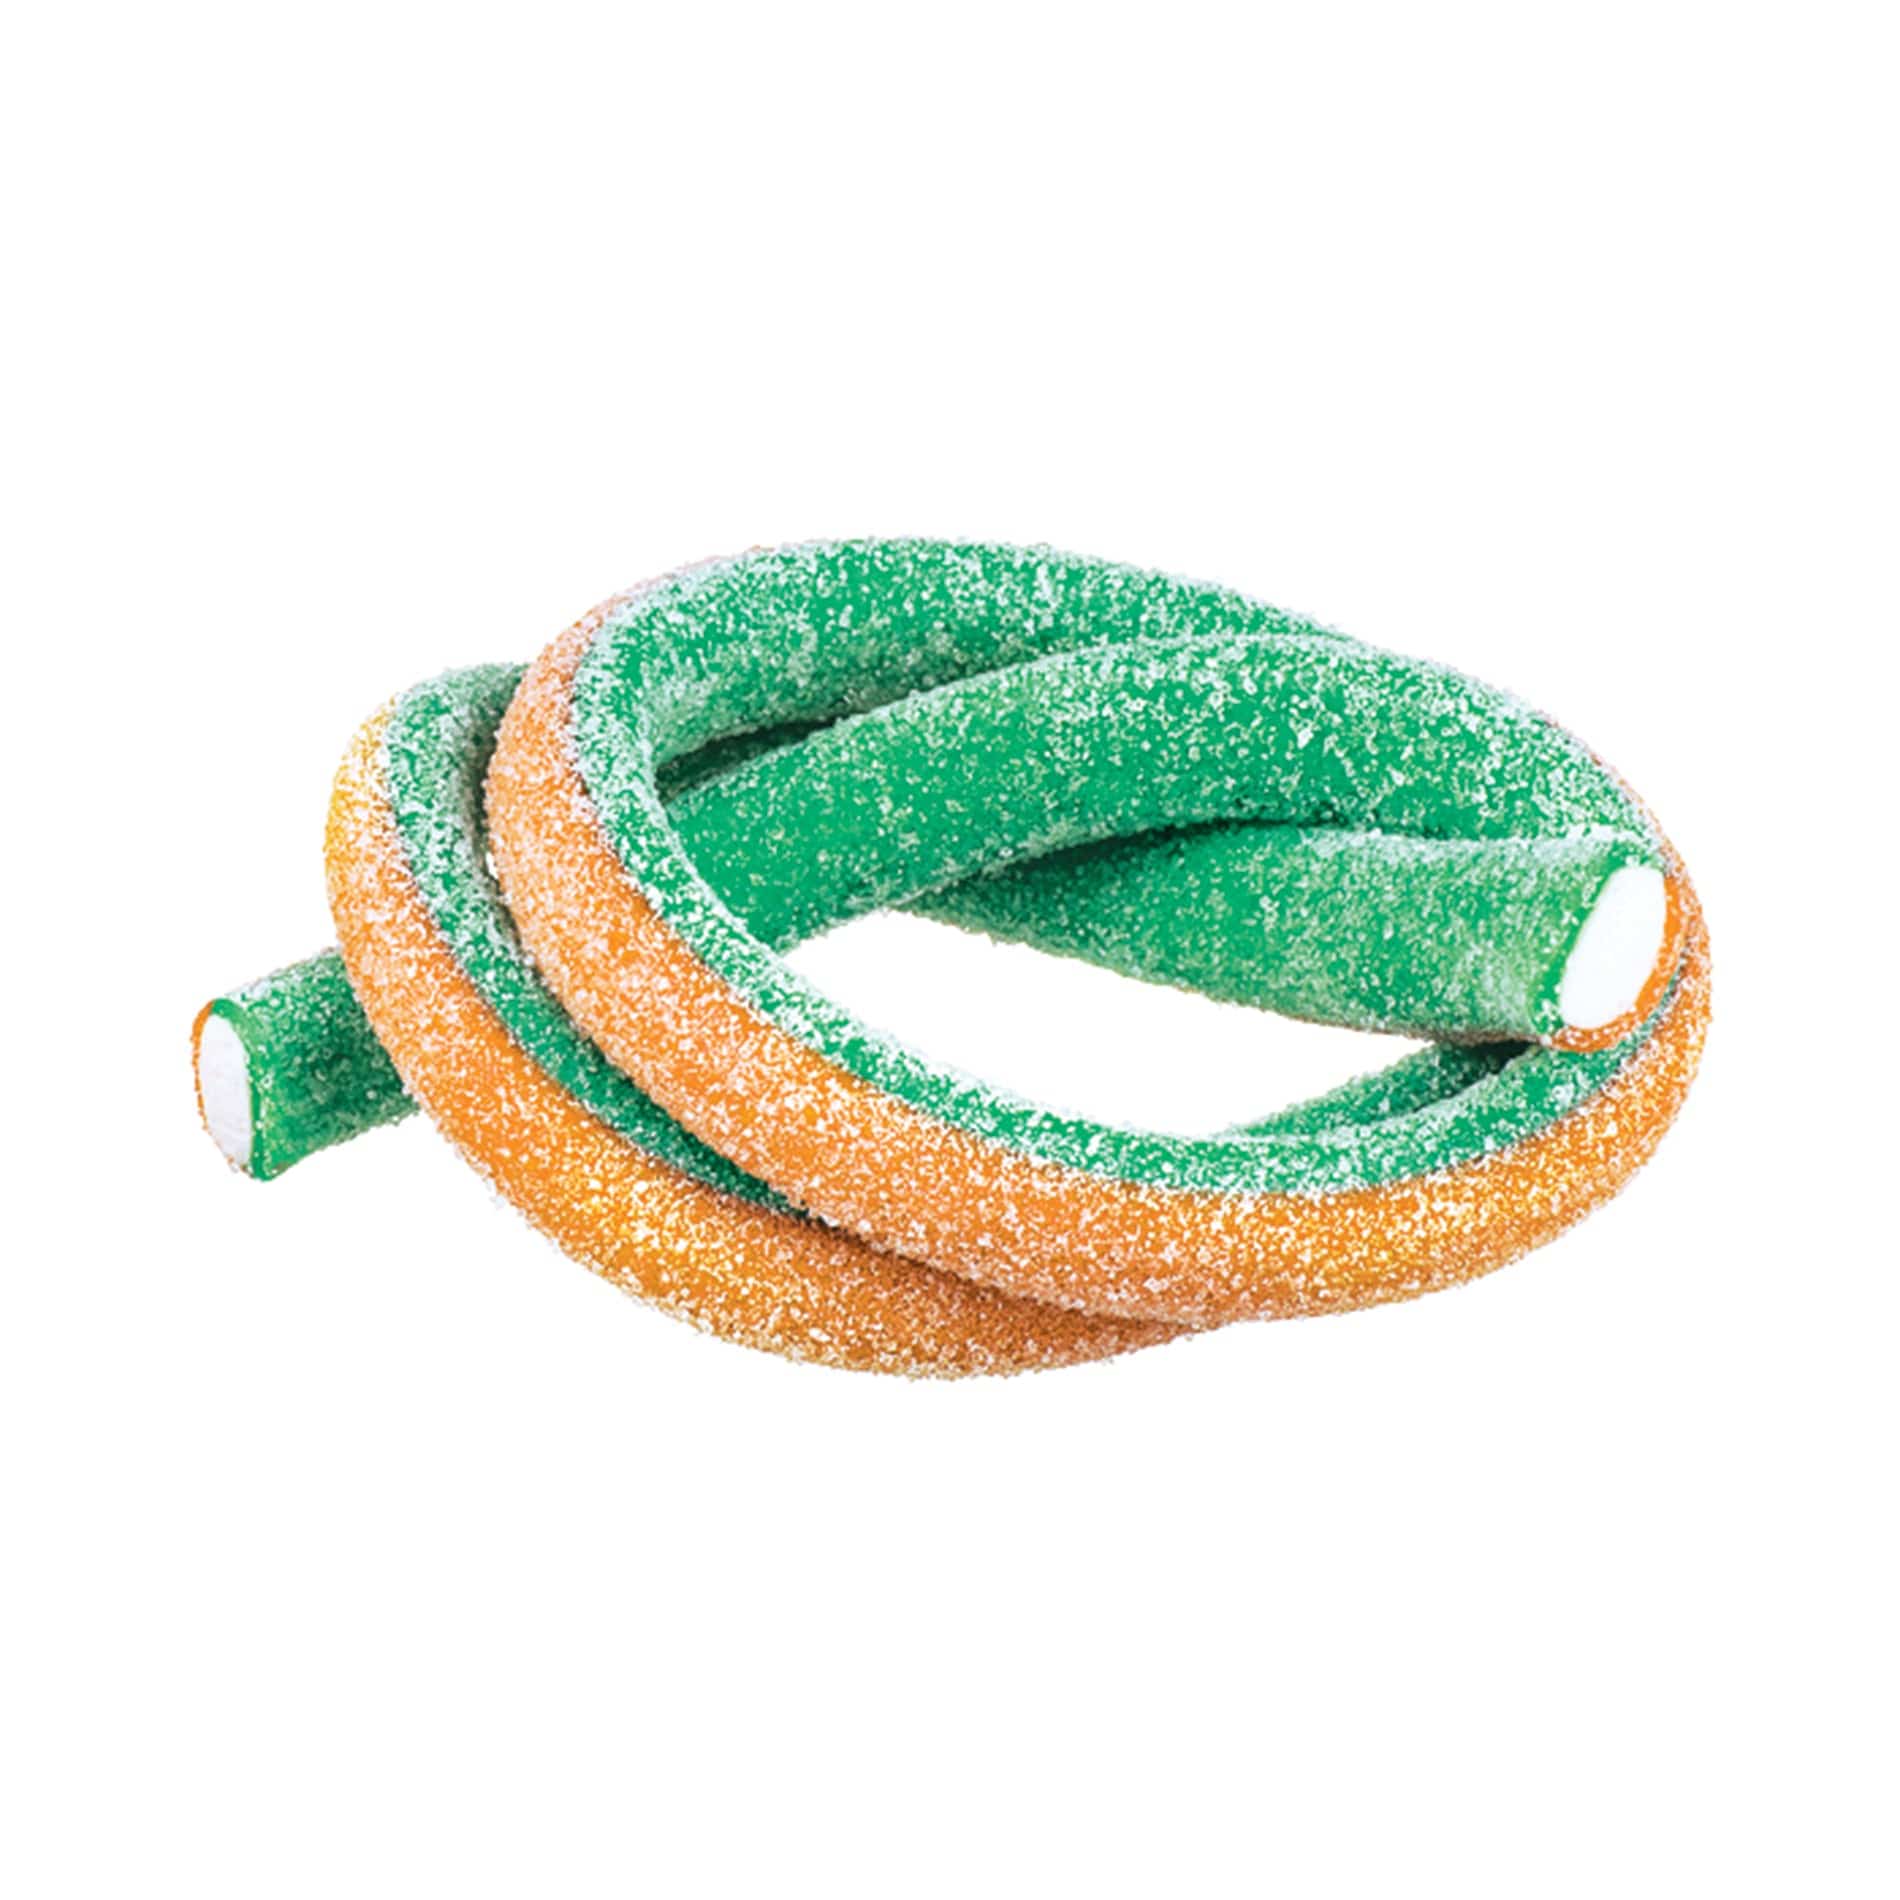 Meeega Cables Gummy Rope SOUR ORANGE LIME Copy of Meeega Cables European Chewy Rope Candy - Custom 12-Pack individually wrapped Meeega Cables, each over 2-feet long cups with lids and straws